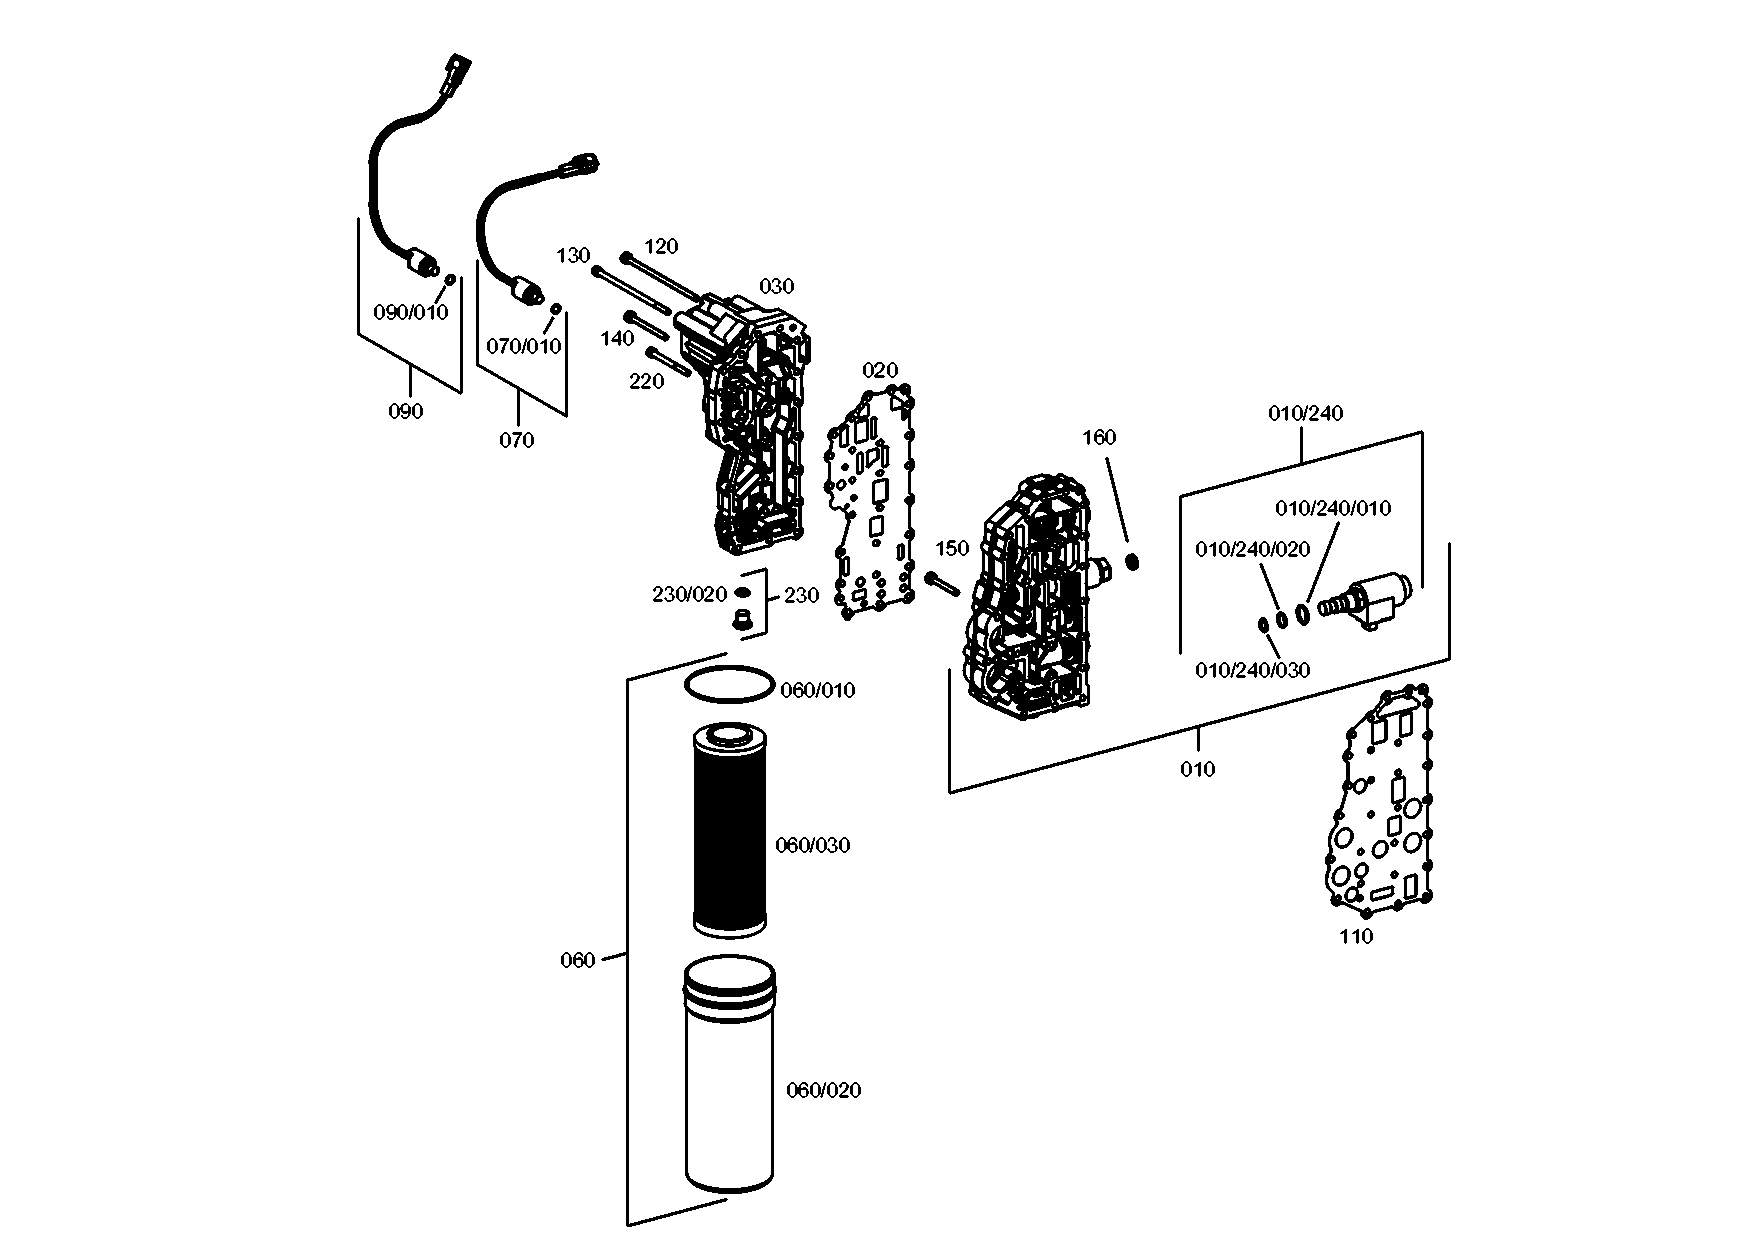 drawing for AGCO F824101470020 - SOLENOID VALVE